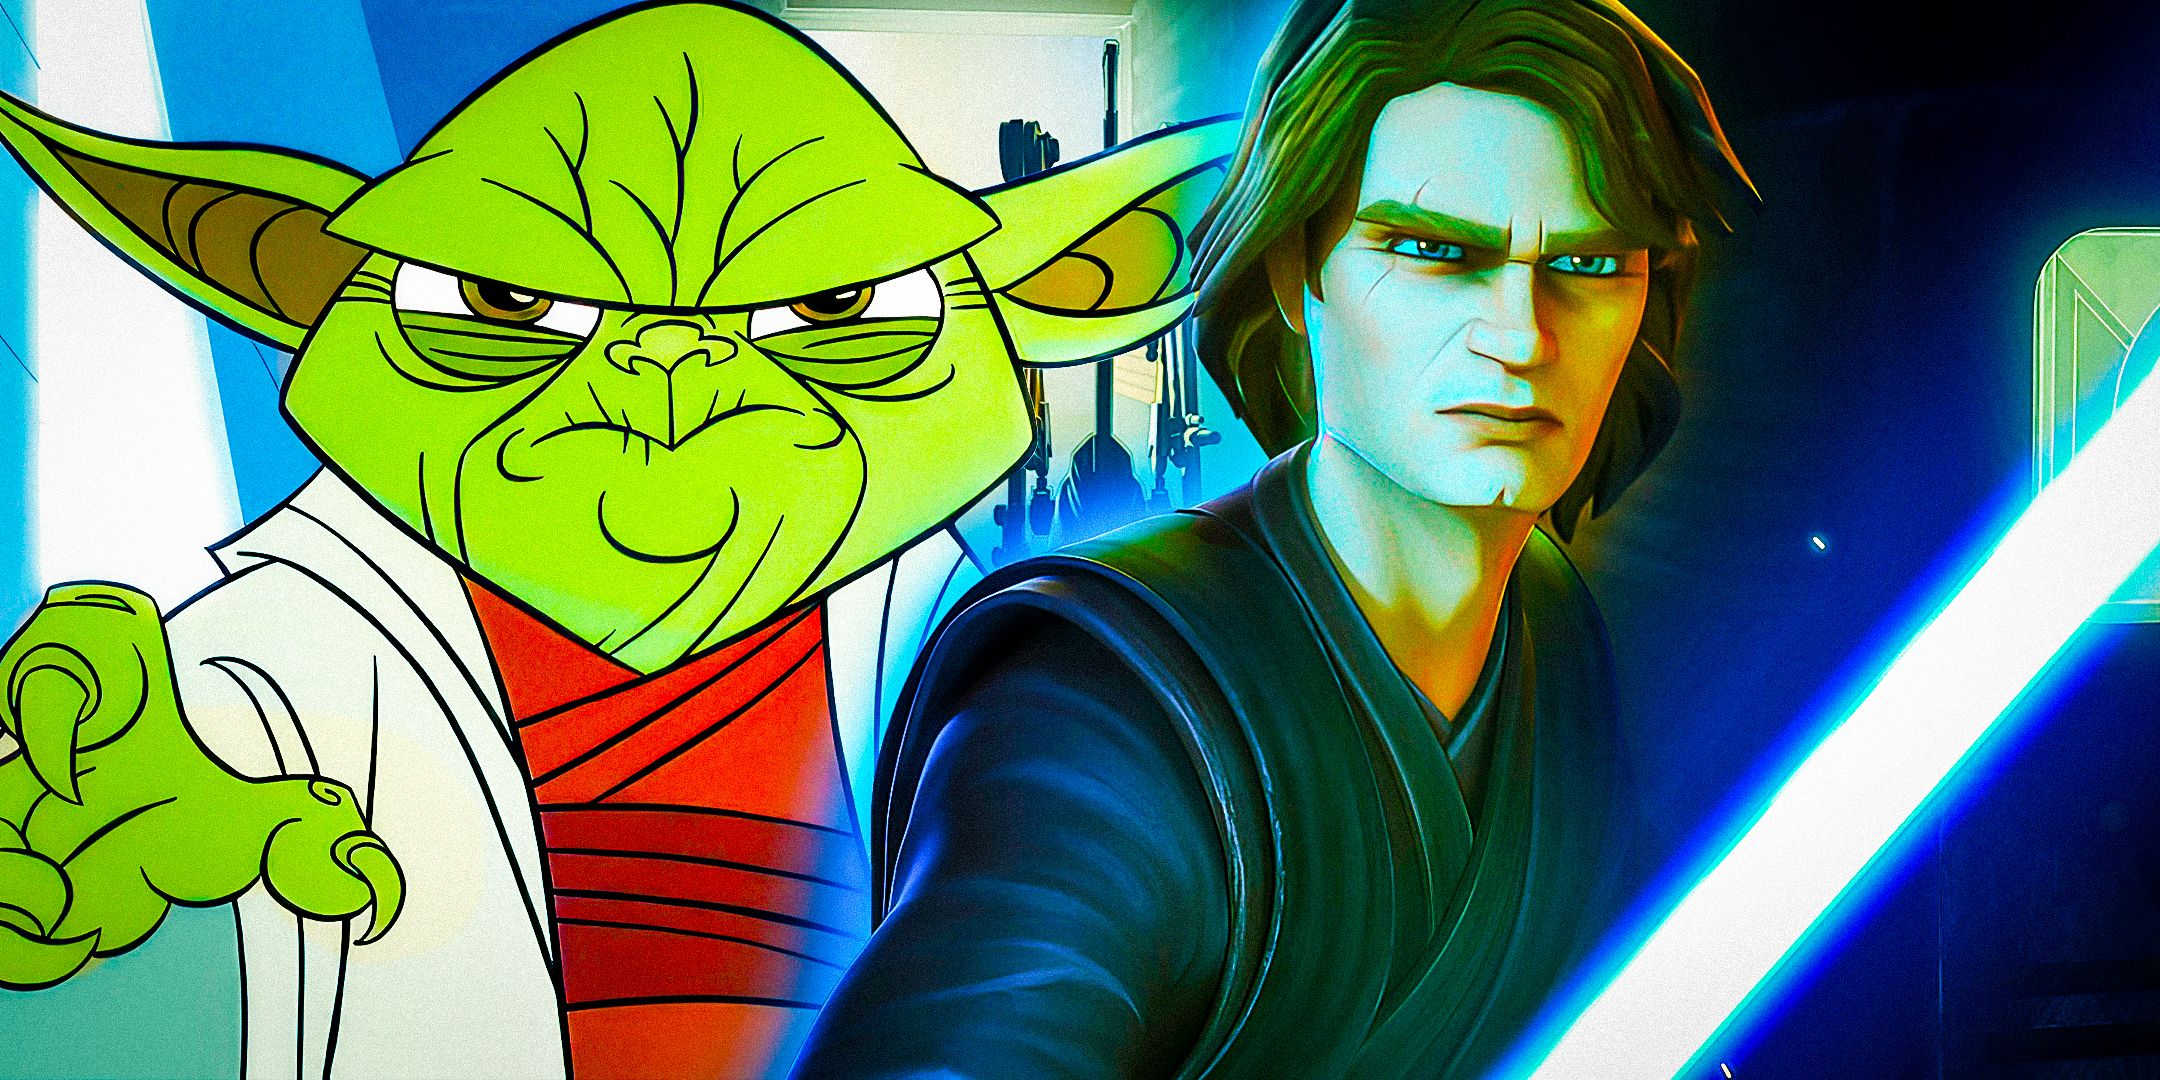 Master Yoda looking angry from Star Wars: Clone Wars (2003) to the left and Anakin Skywalker looking serious and holding his lightsaber from Star Wars: The Clone Wars (2008) to the right in a combined image